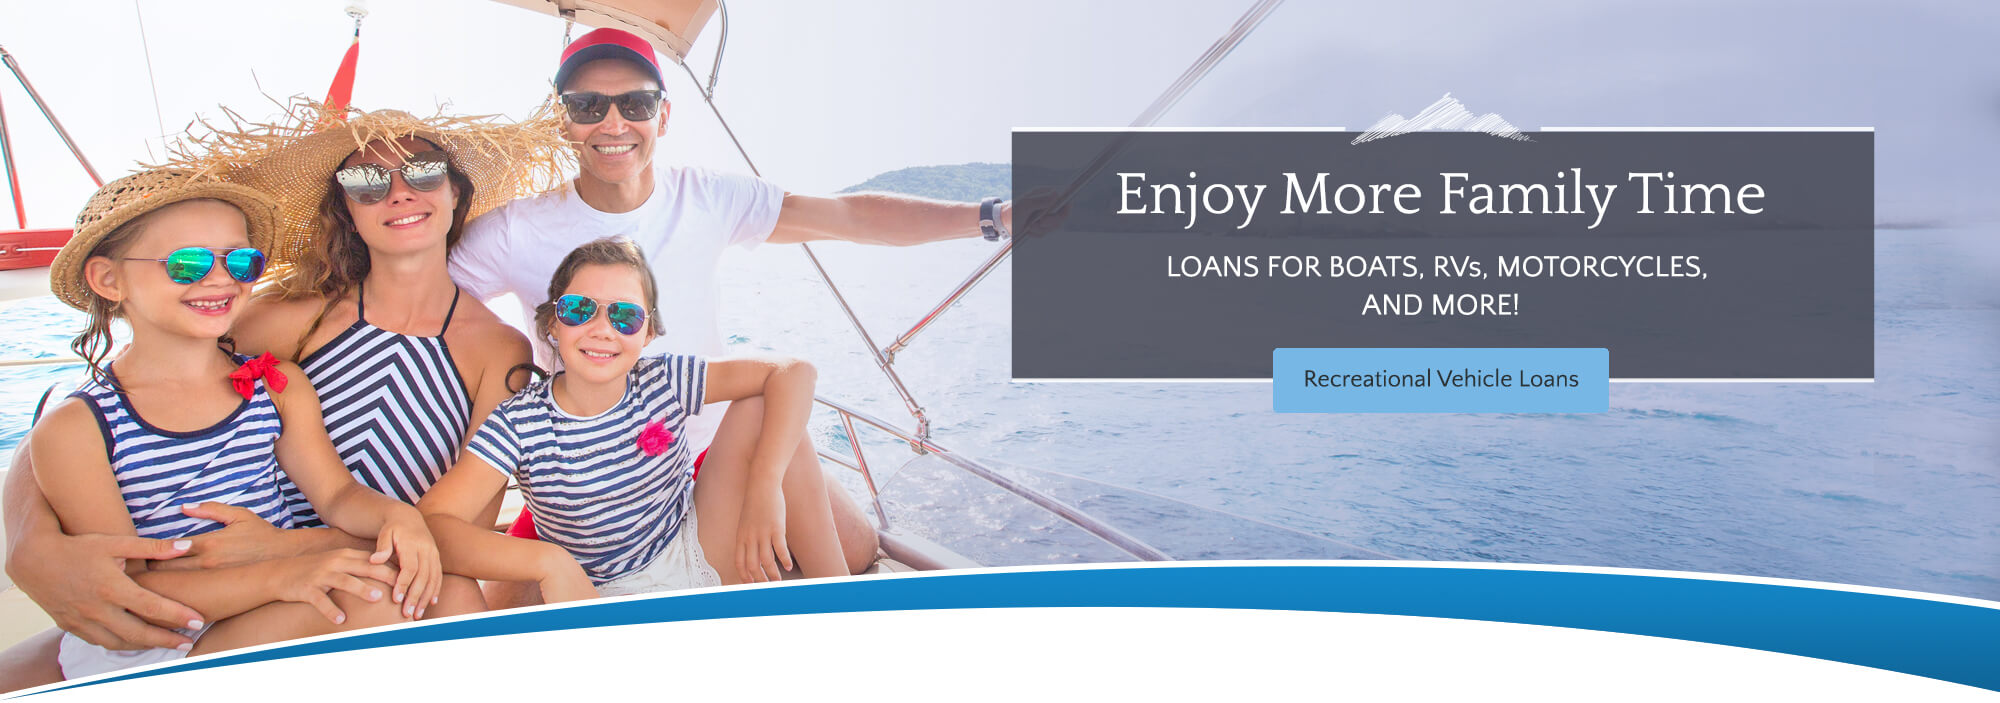 Enjoy More Family Time.  Loans for Boats, RVs, Motorcycles, and More!